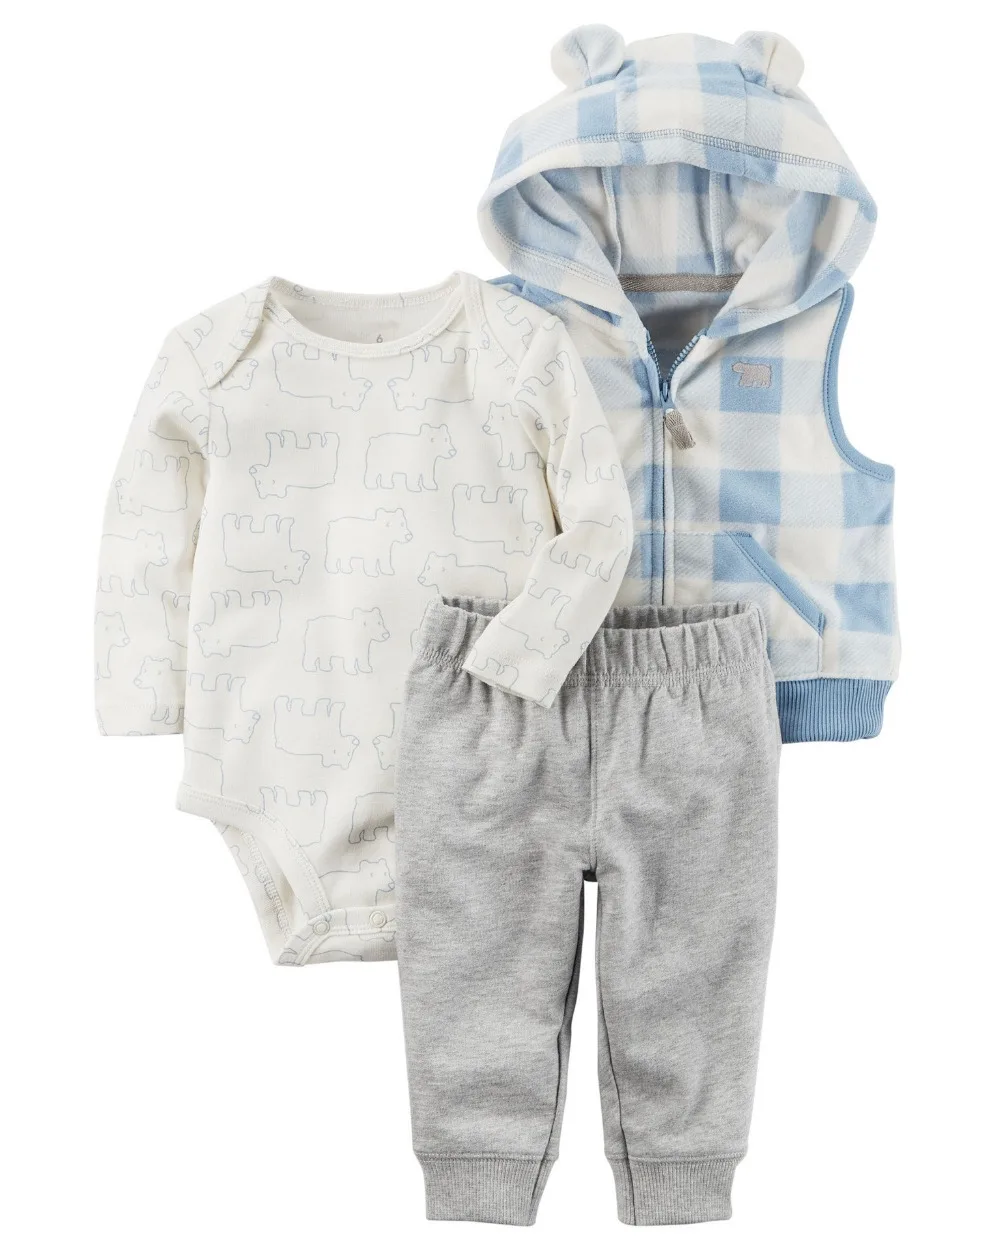 Carters 3 piece vest set sector rotation investing